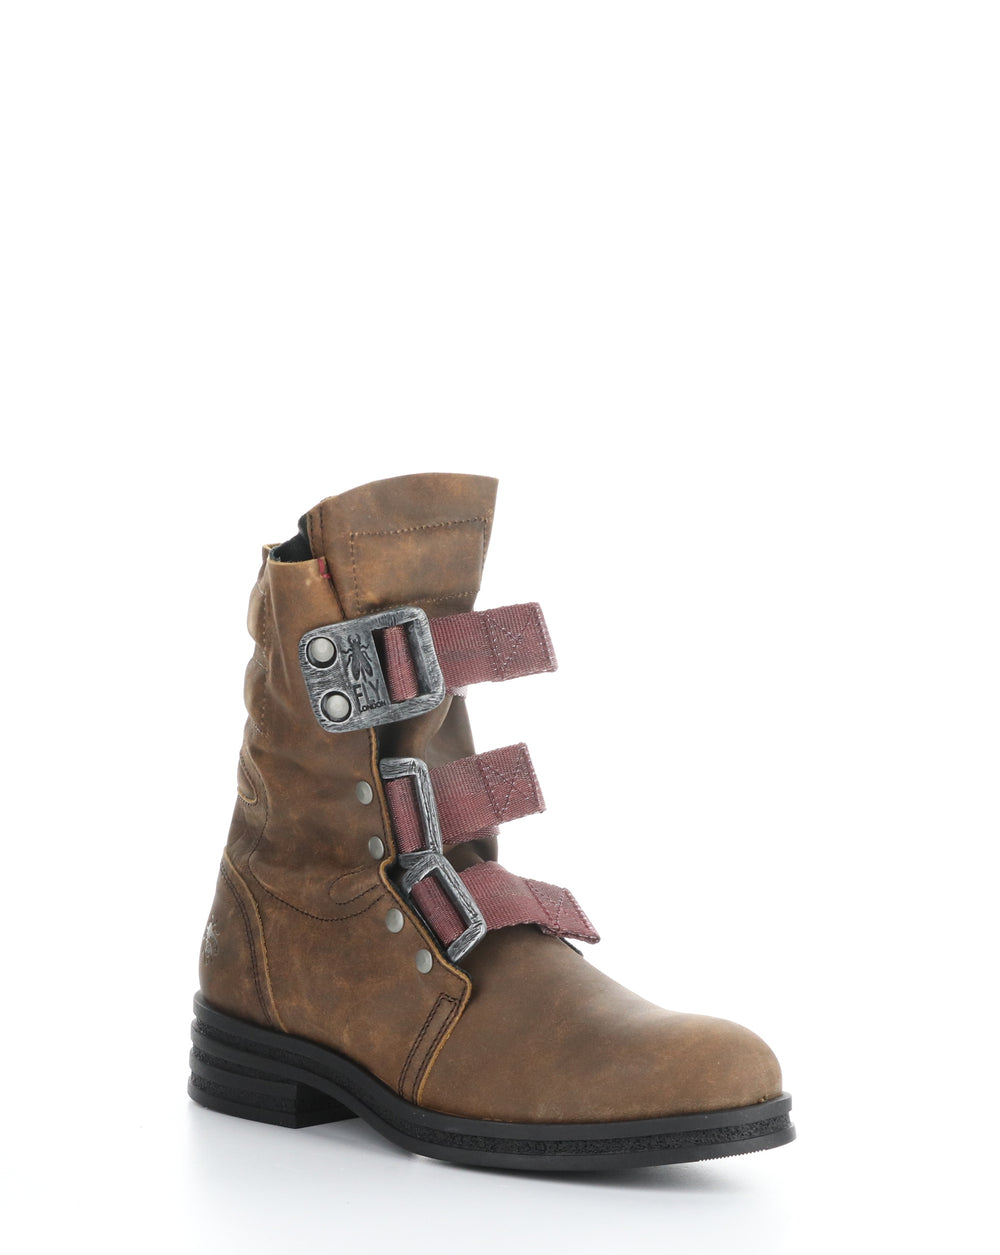 KIFF682FLY 011 BROWN Round Toe Boots